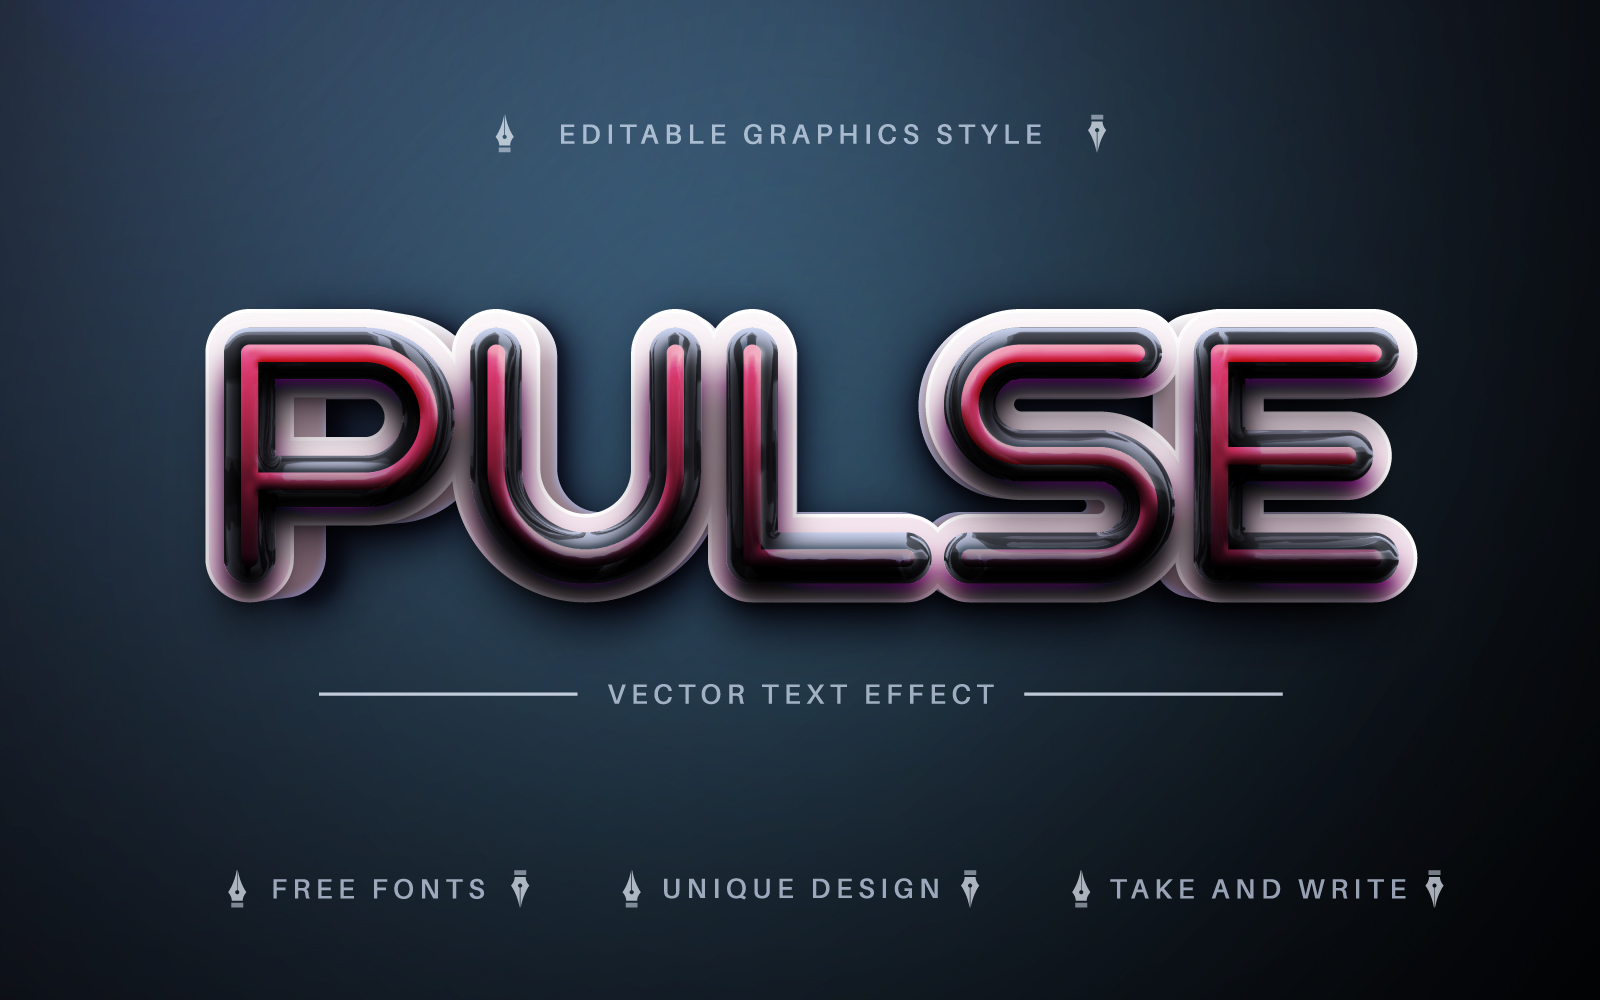 Reaistic 3D - Editable Text Effect, Font Style, Graphicsd Illustration